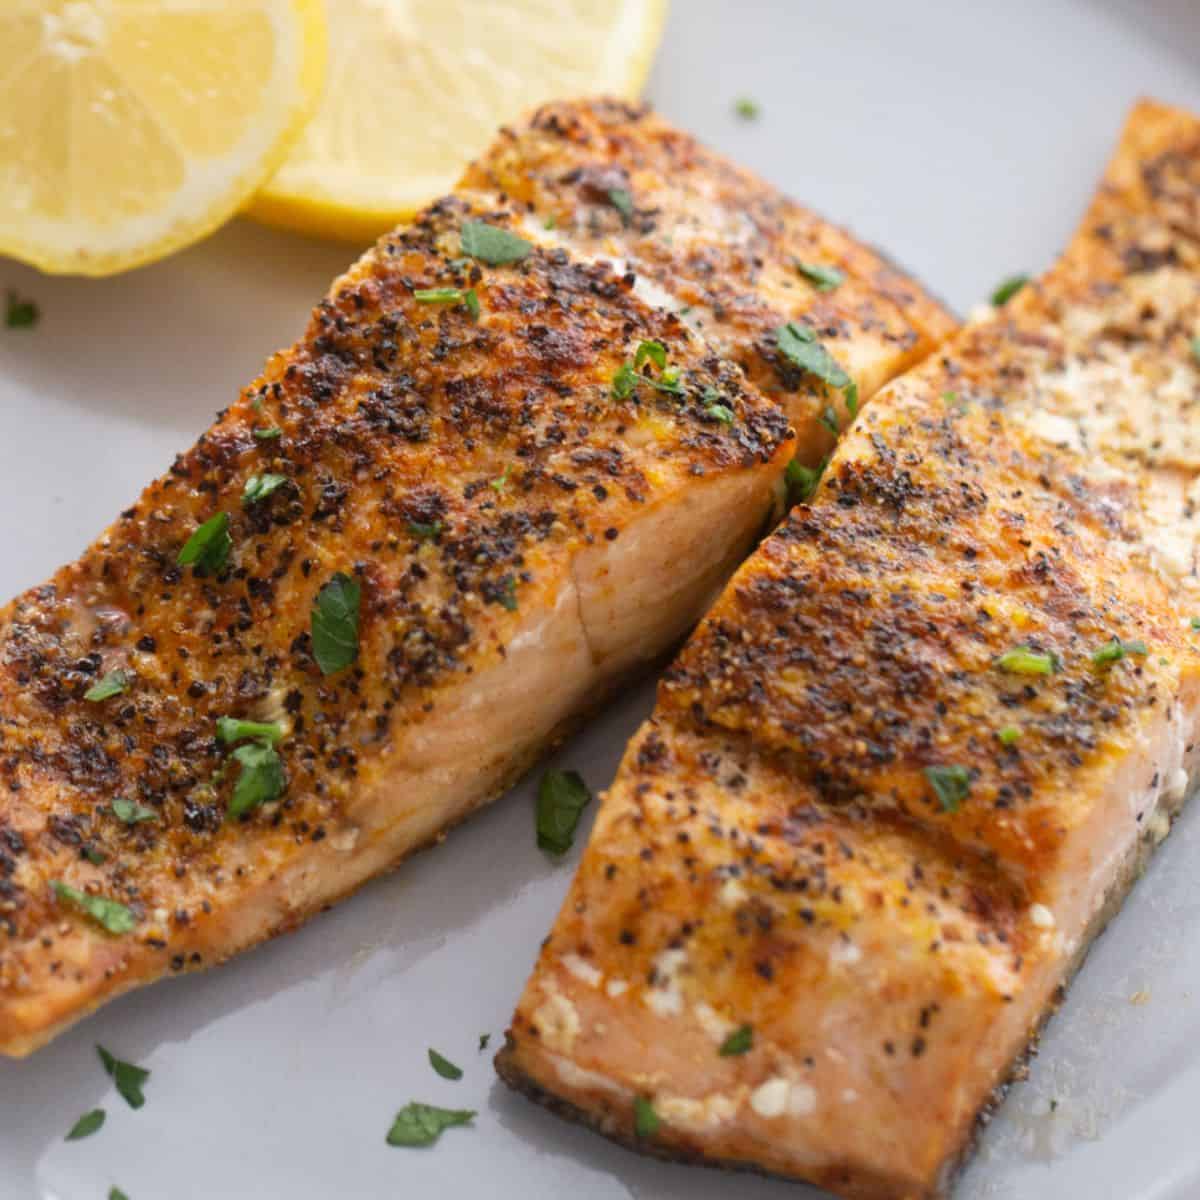 A plate of two air fryer salmon fillets seasoned with lemon pepper seasoning and garnished with fresh herbs and lemon. 